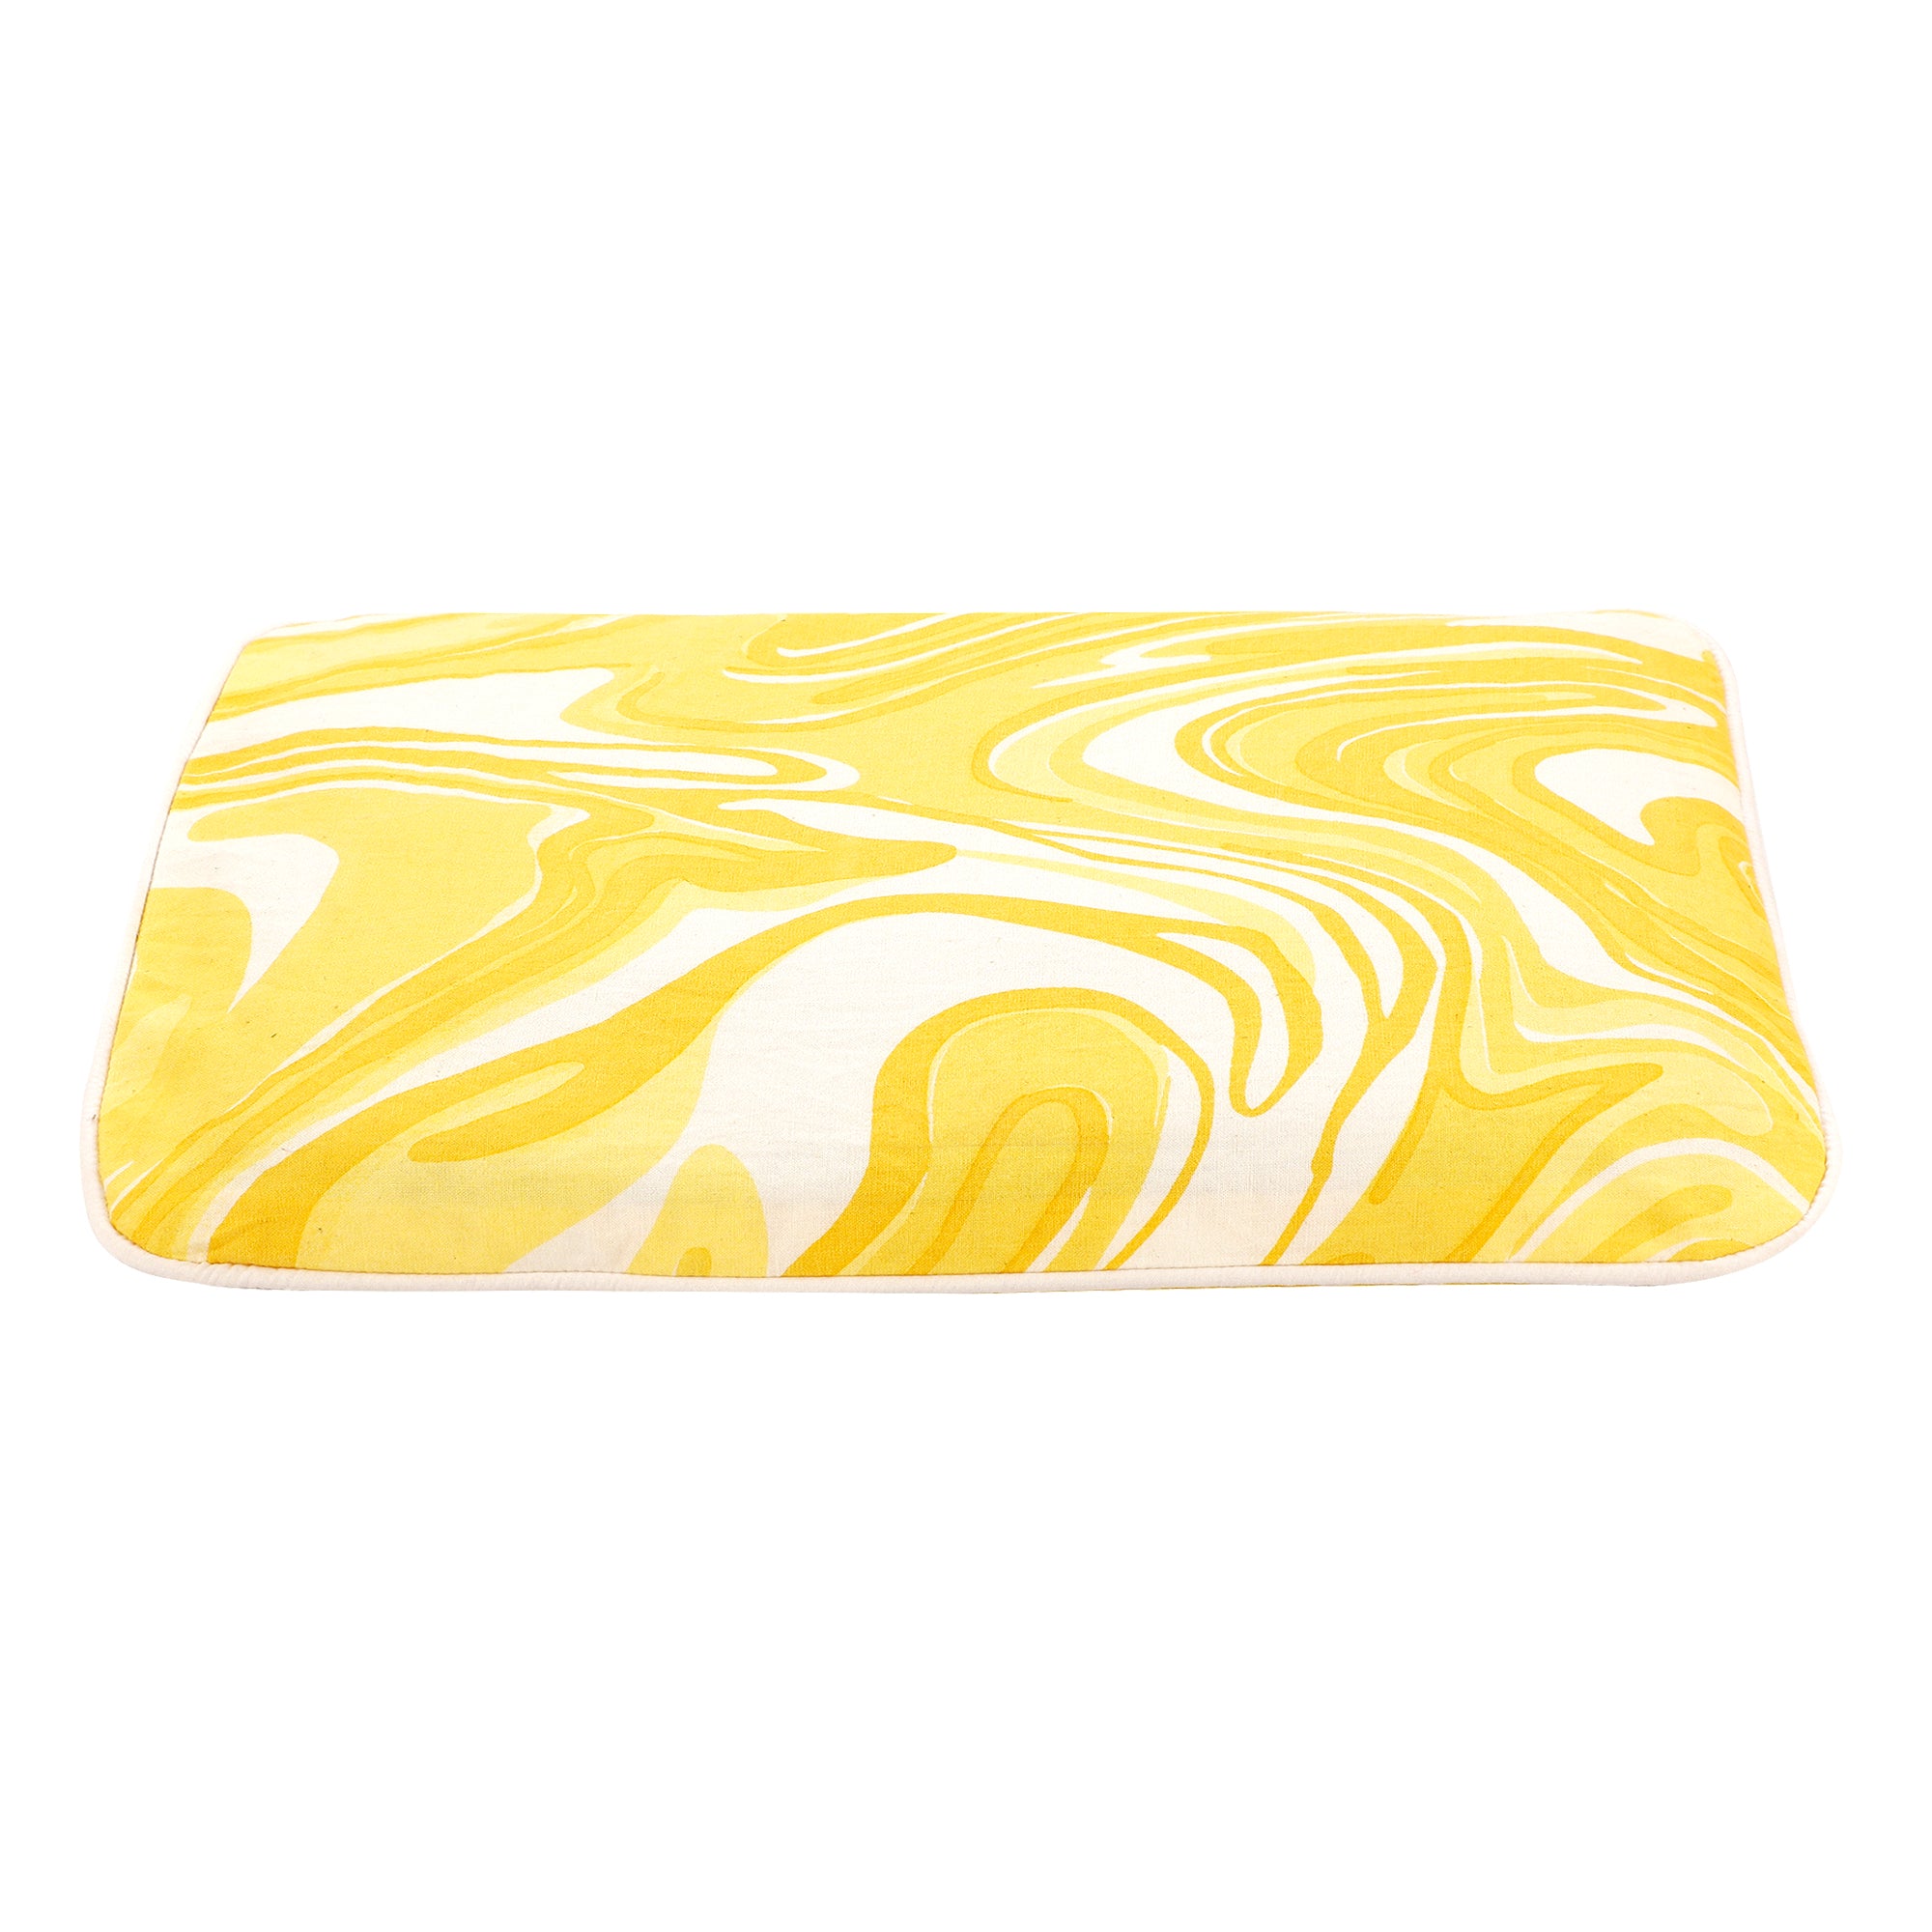 YOLK YELLOW MARBLE MUSTARD PILLOW COVER AND FILLER SET